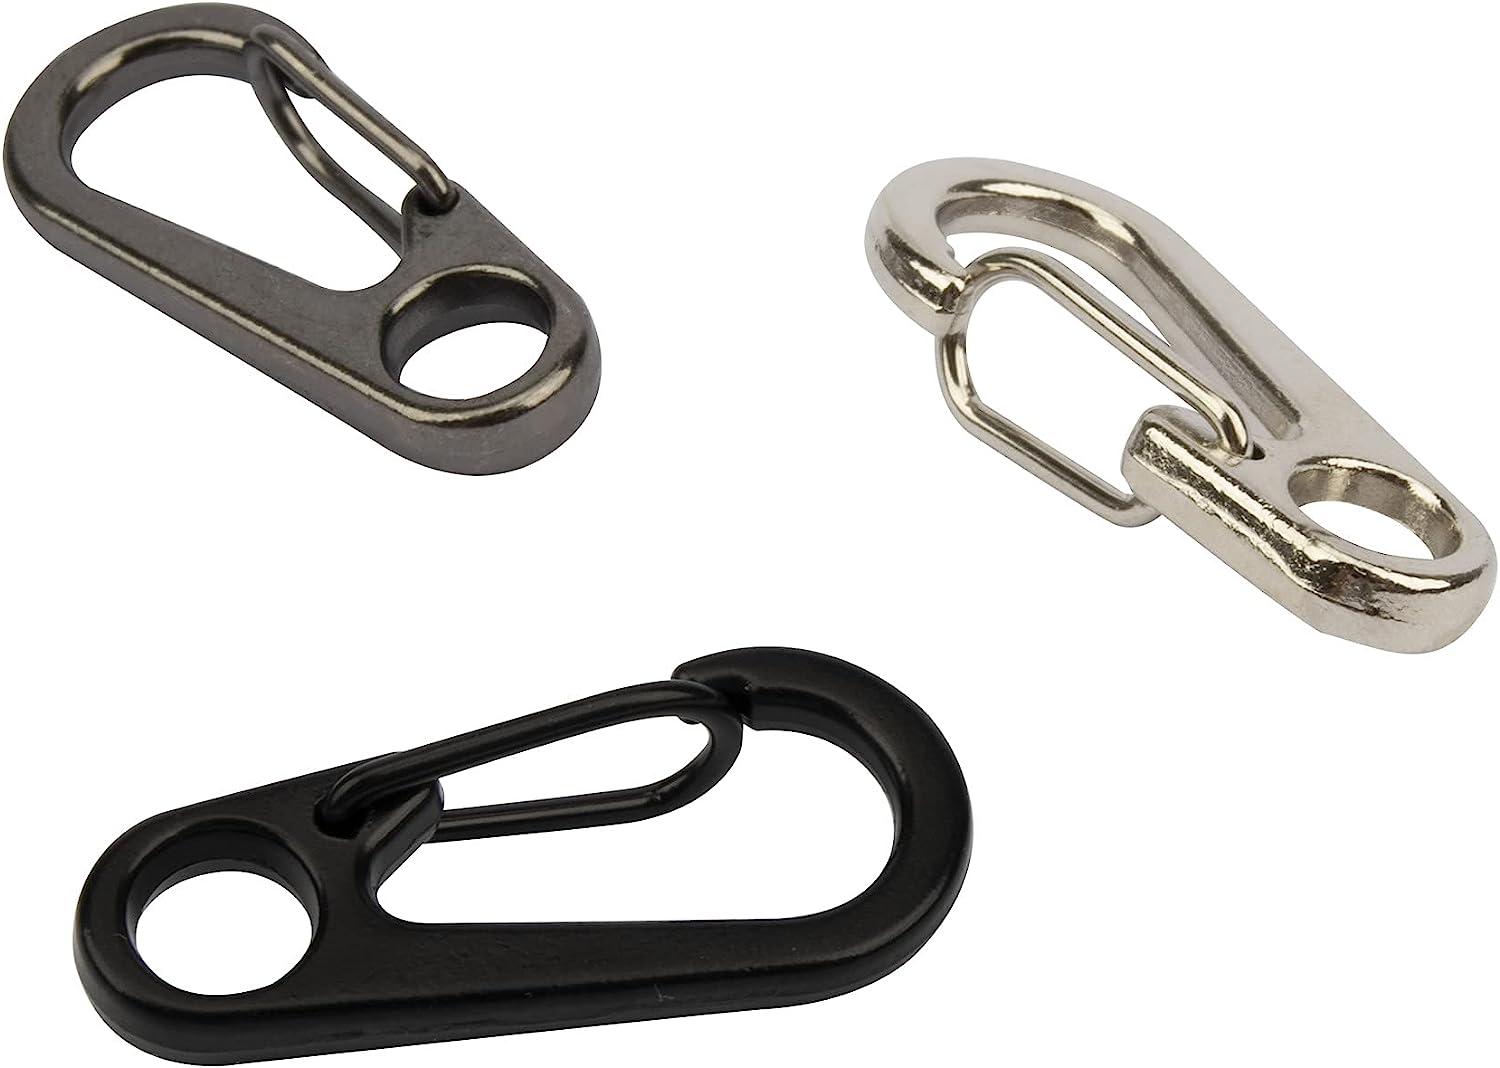 Carabiner Hook Portable Keychain Clips Small Alloy Snap Hooks for Camping  Gear 30pcs S-shaped Carabiners Tiny Clip Attachments - AliExpress